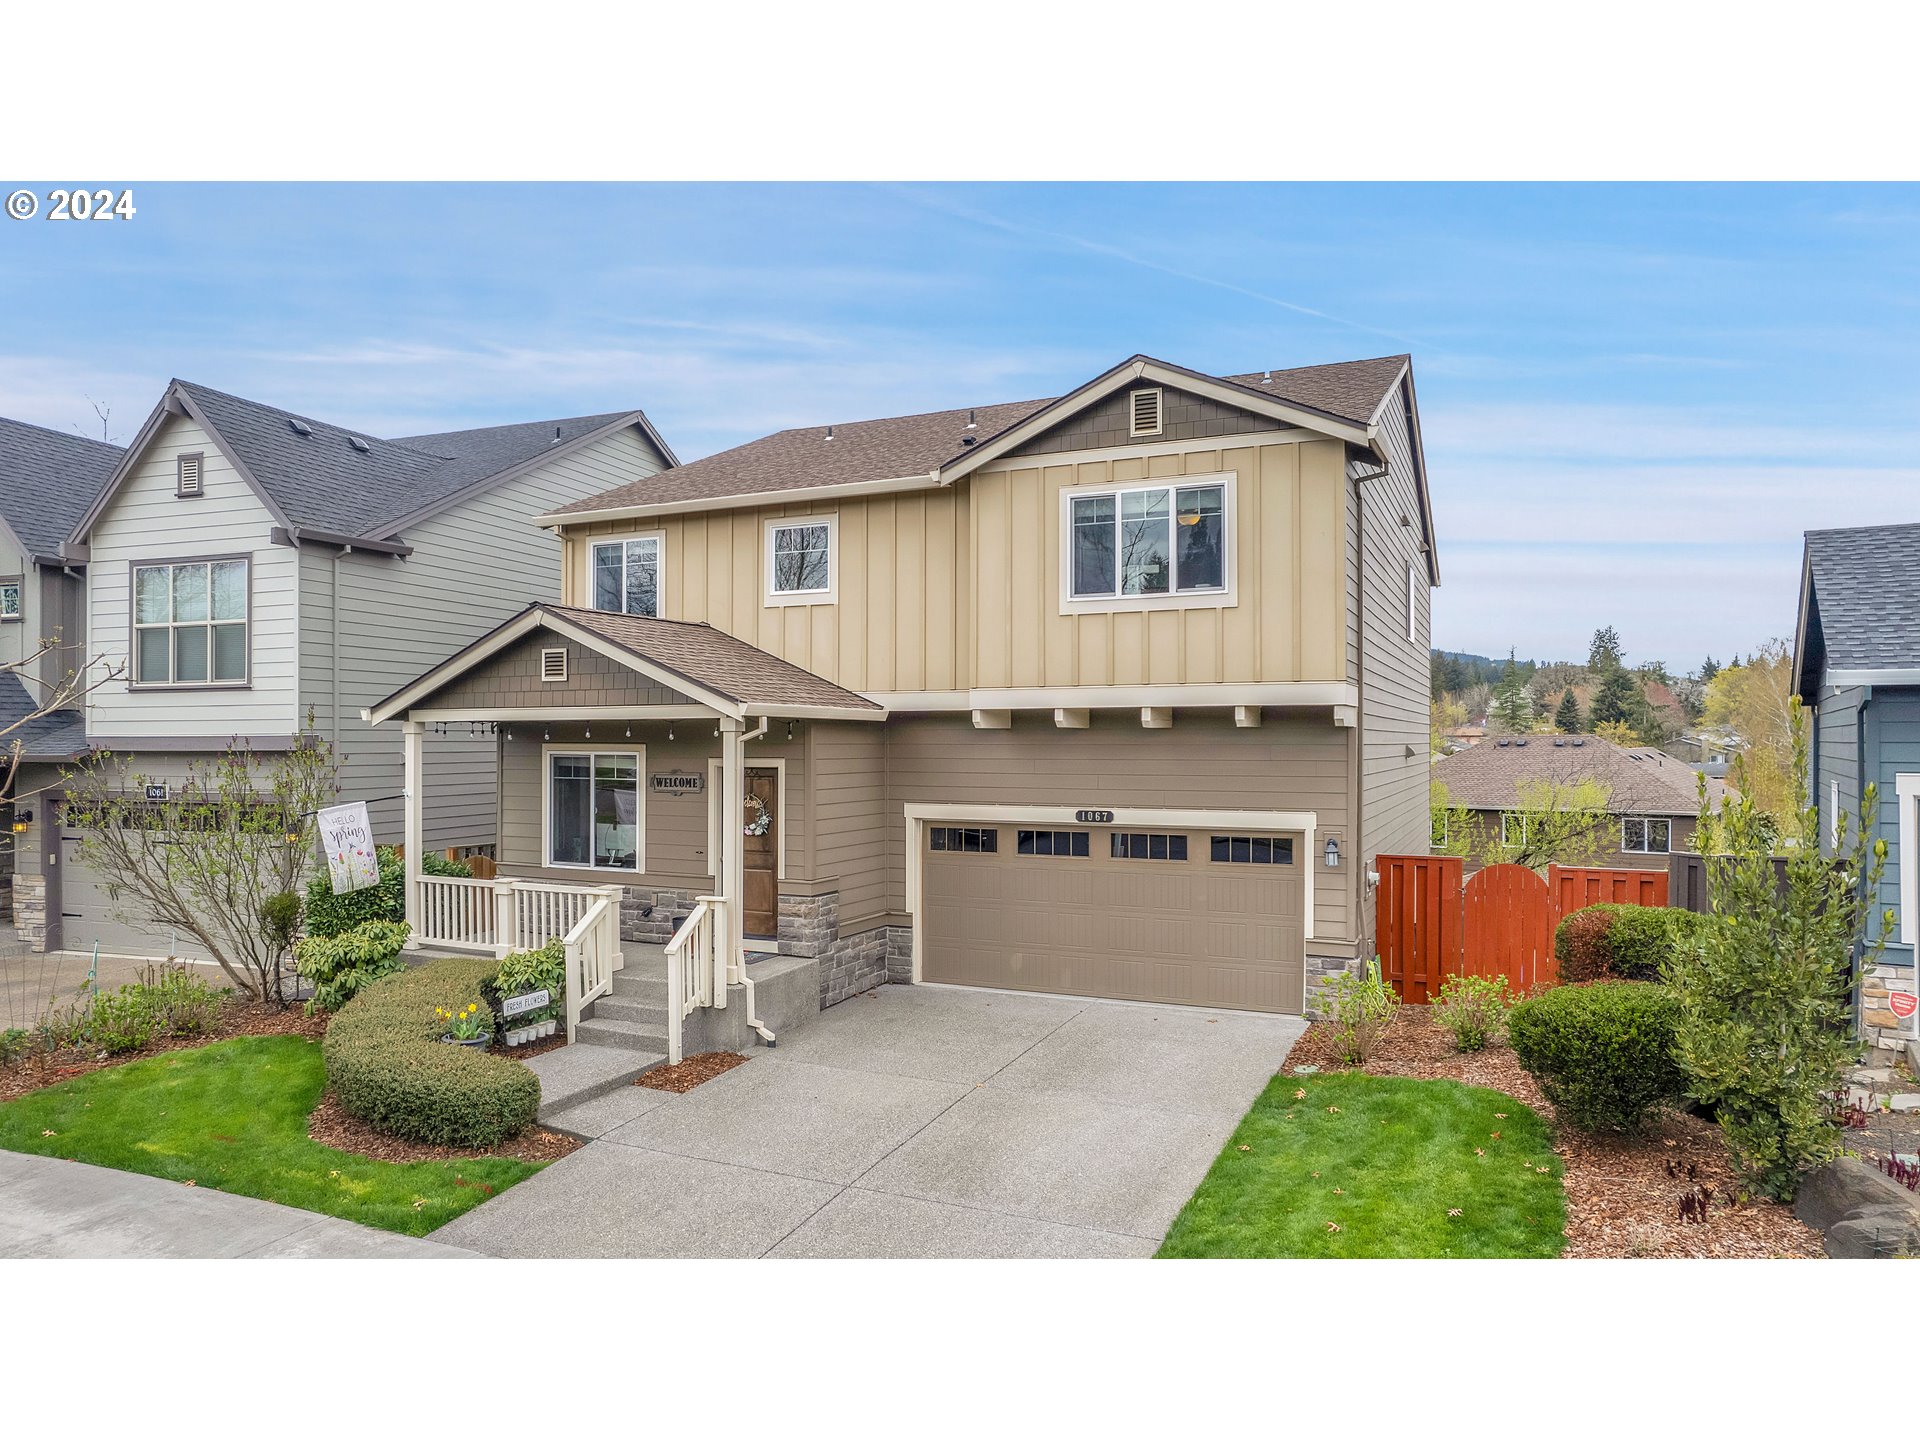 1067 PARKSIDE AVE, Forest Grove, OR 